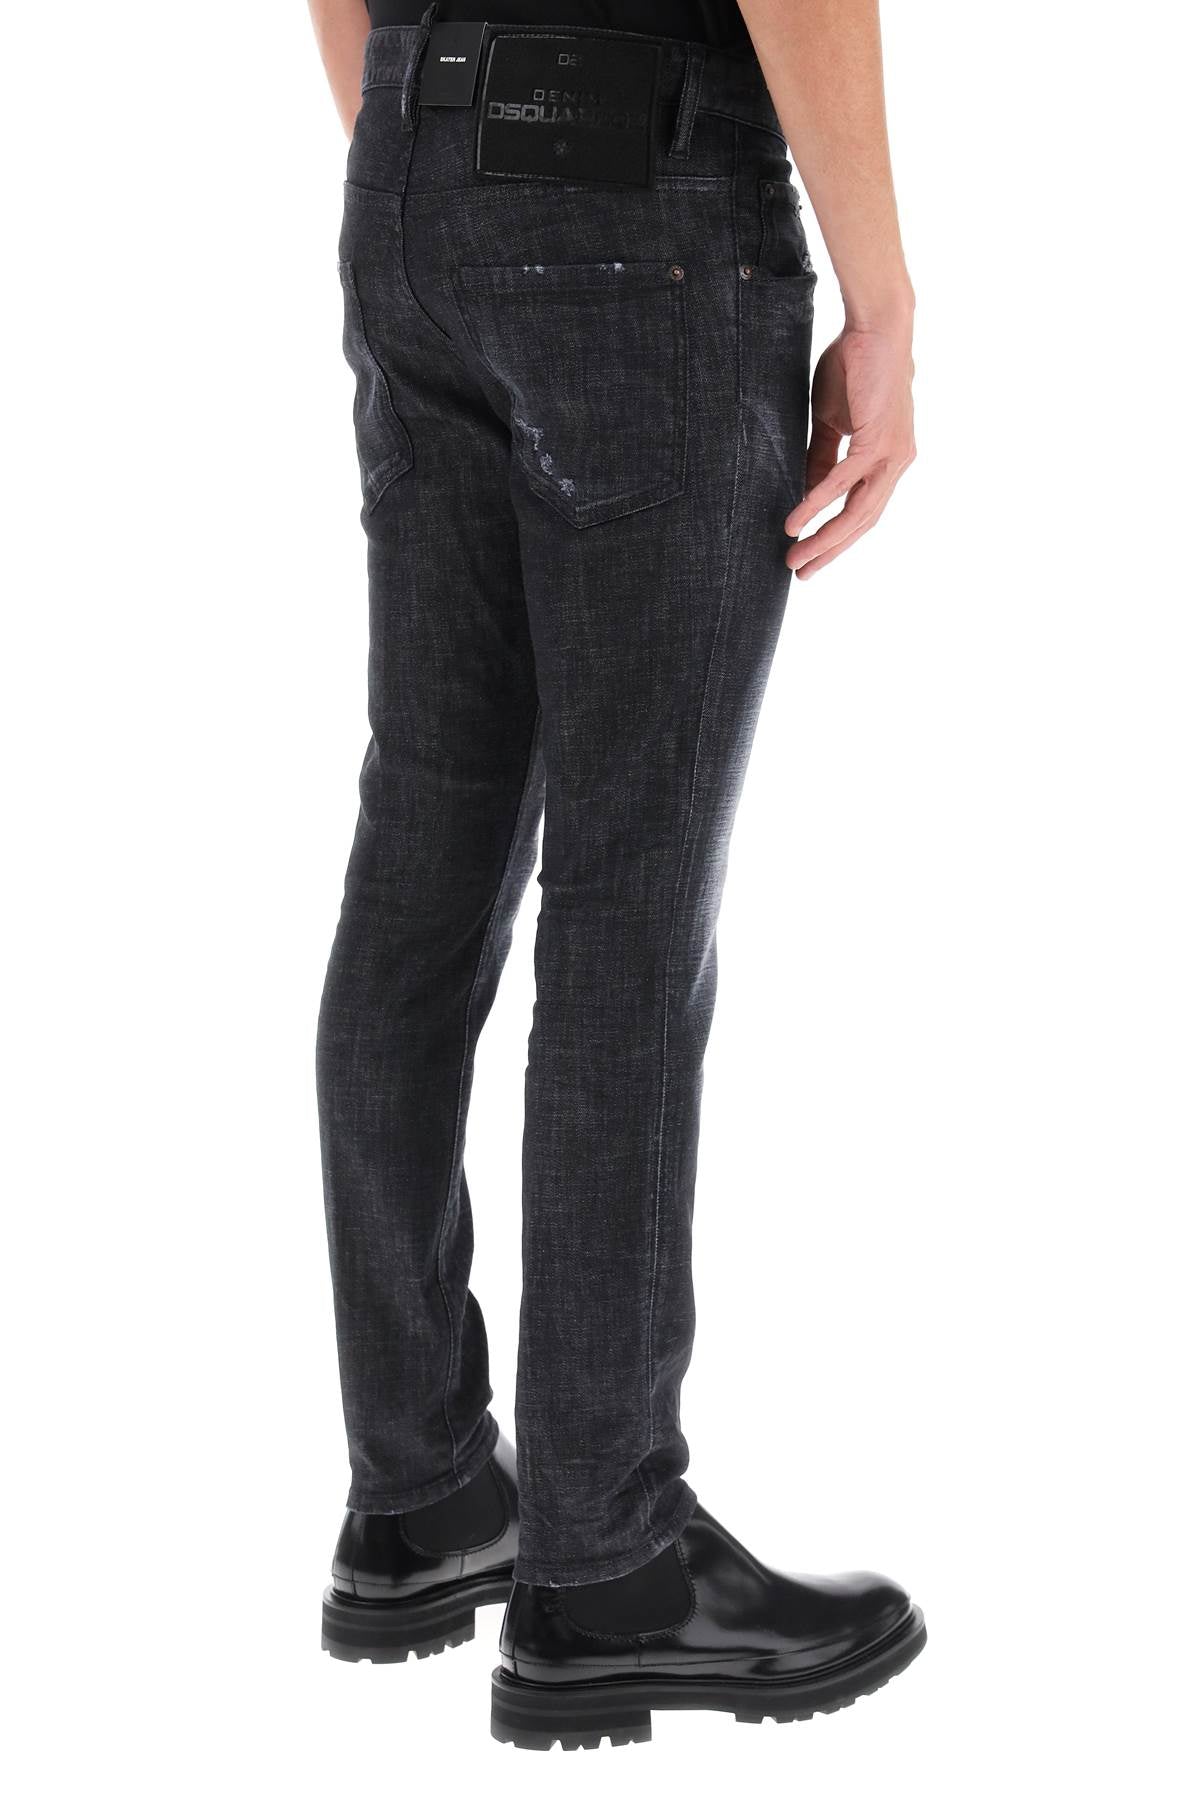 Dsquared2 Dsquared2 skater jeans in black clean wash